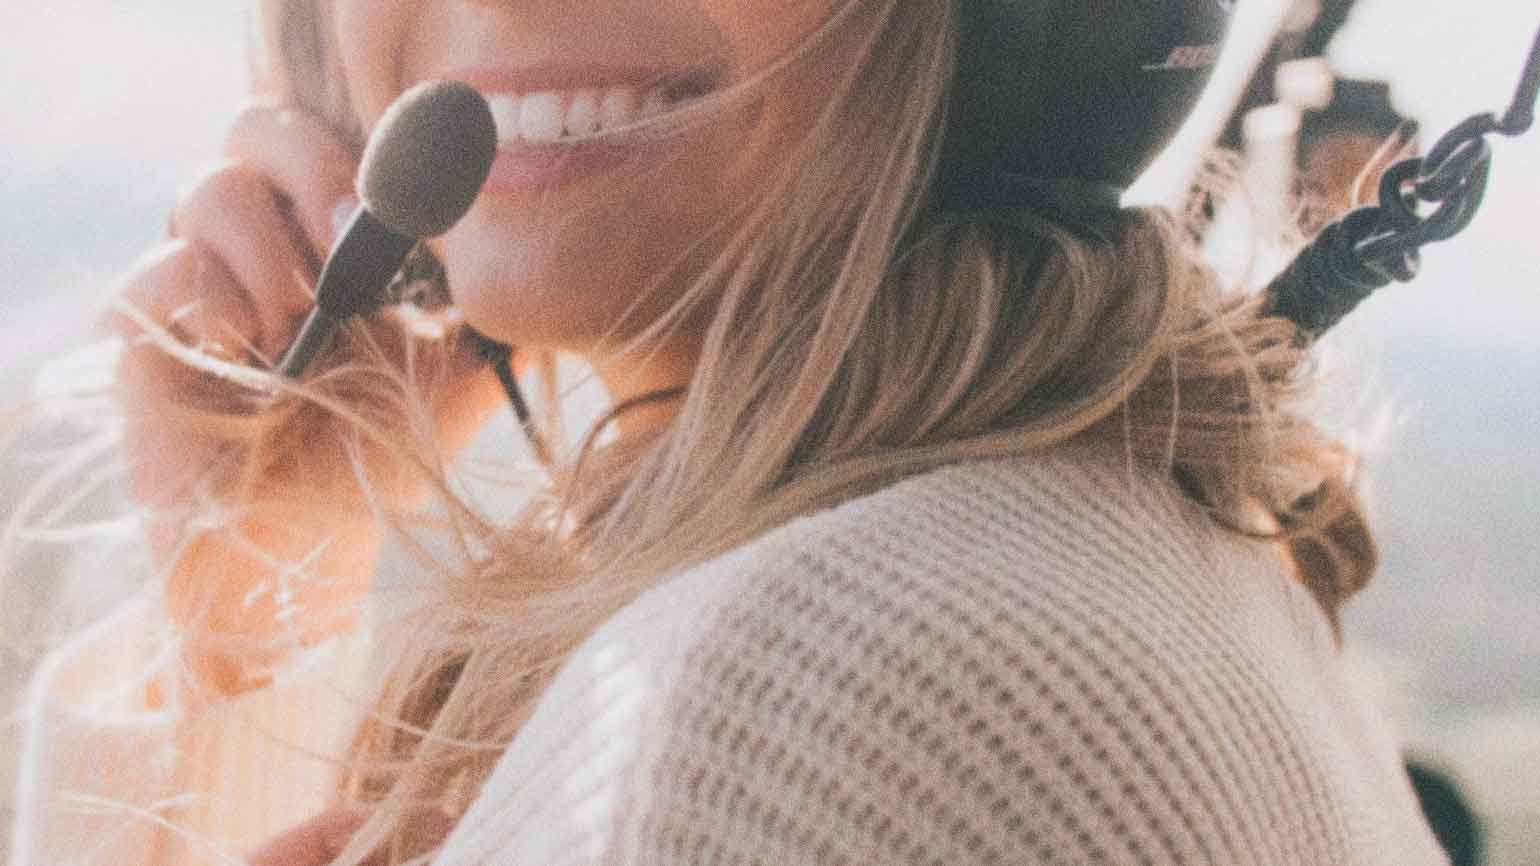 Woman achieves goal of flying in a helicopter with her headset on.